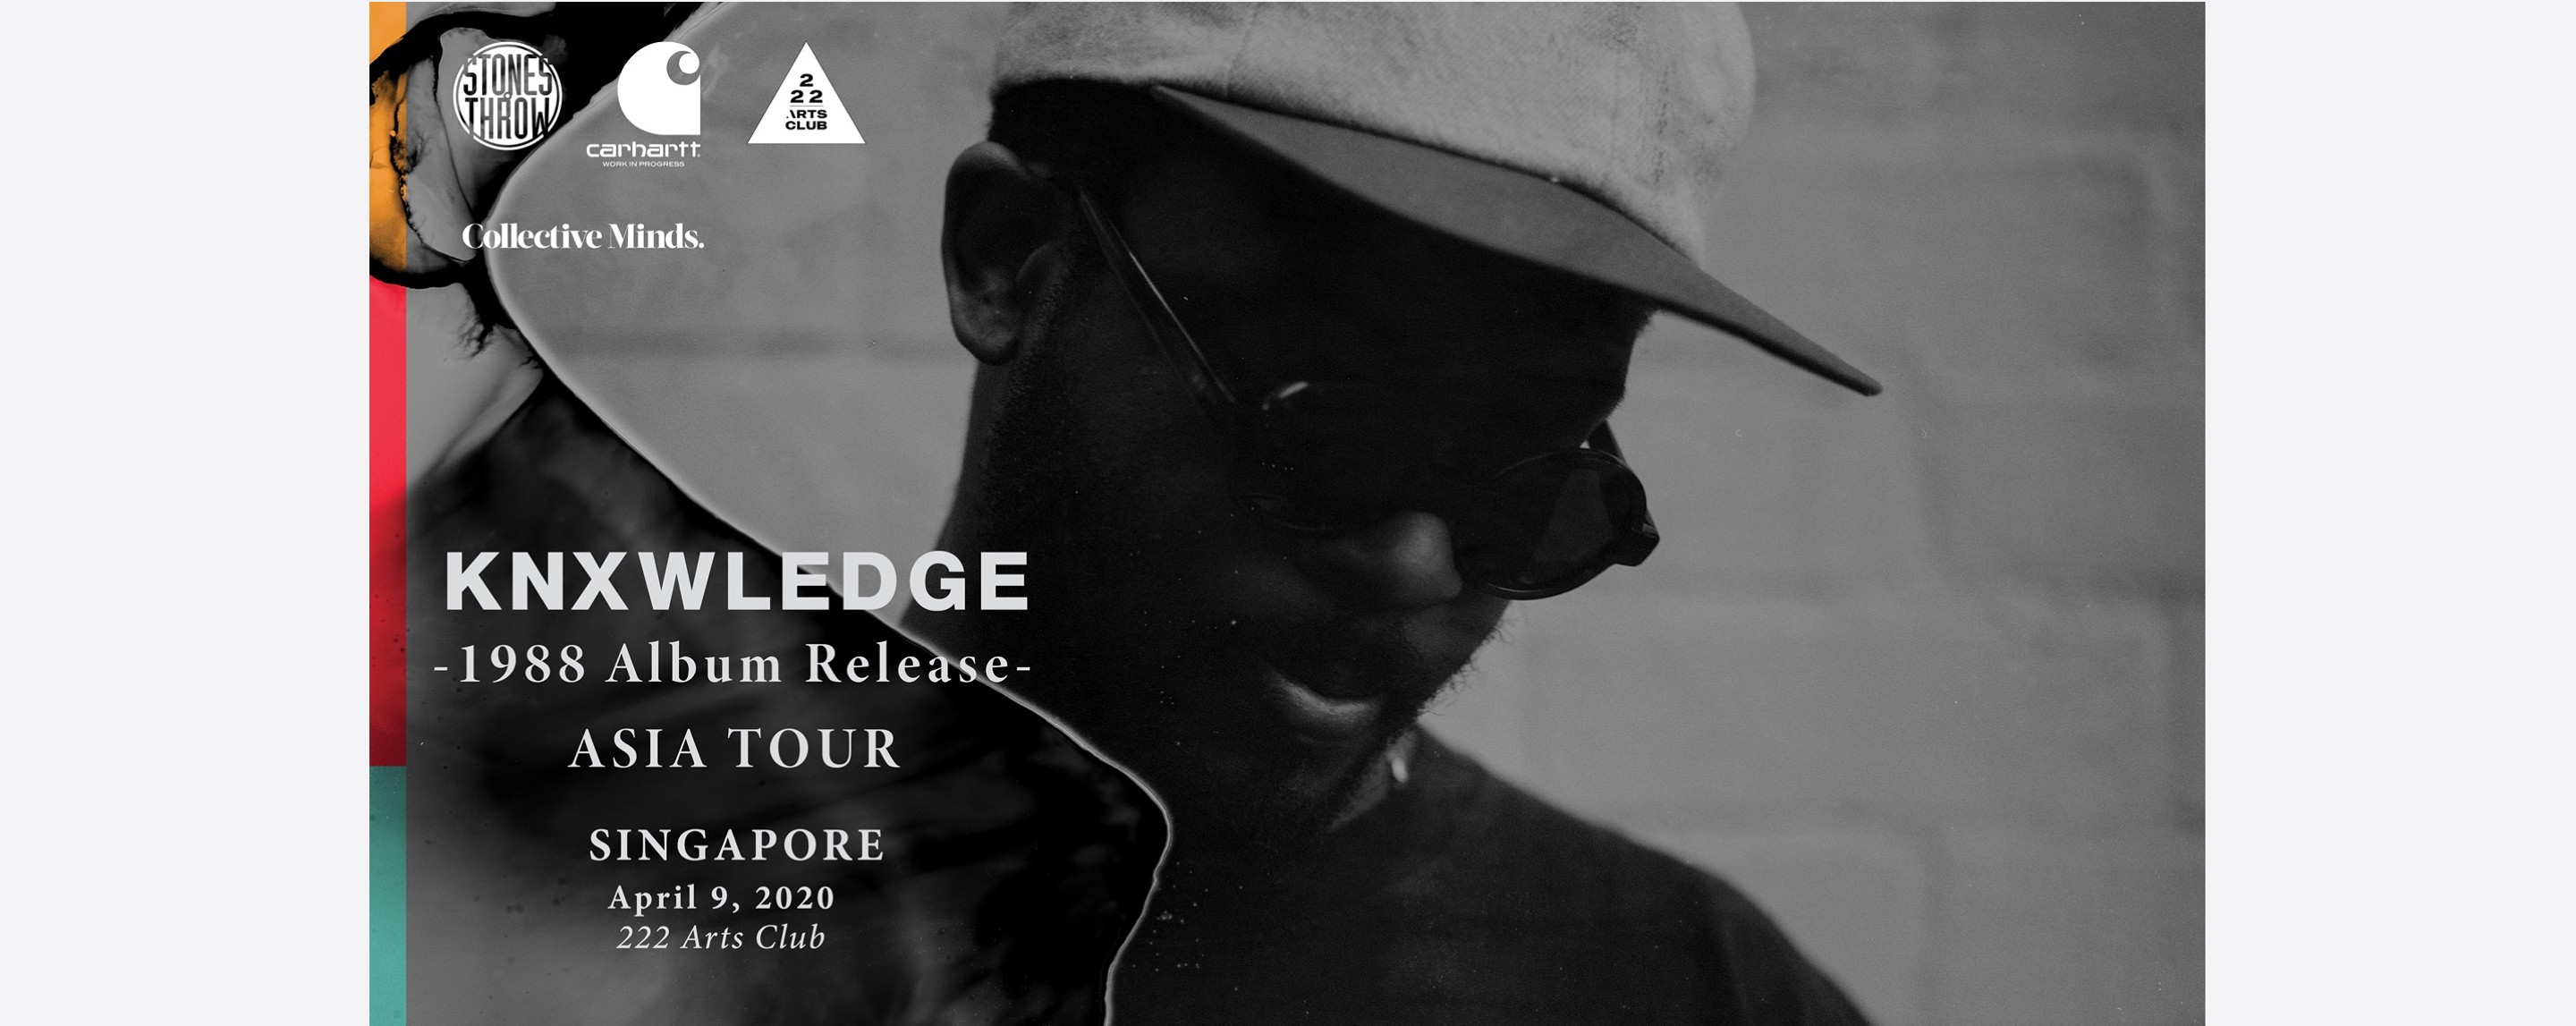 Knxwledge (US) presented by Collective Minds